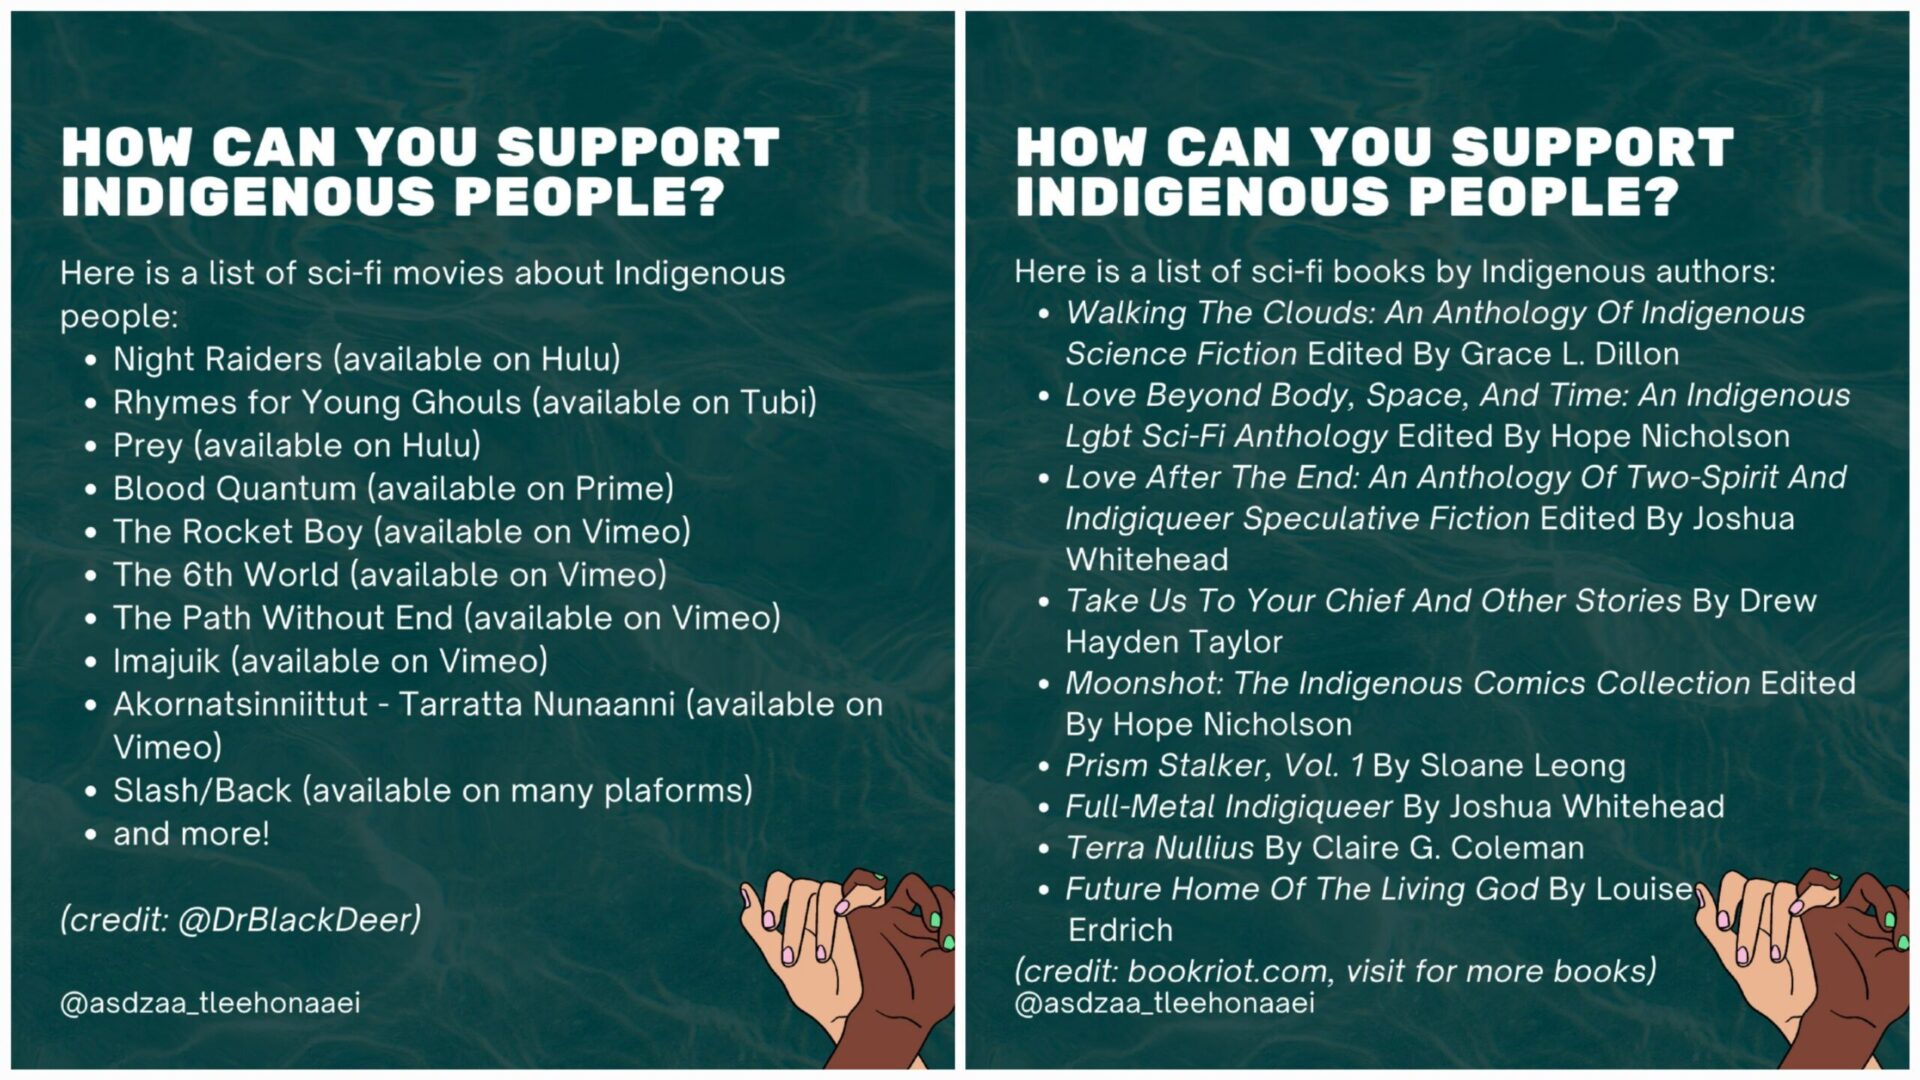 Avatar: The Way of Water boycott by Indigenous people